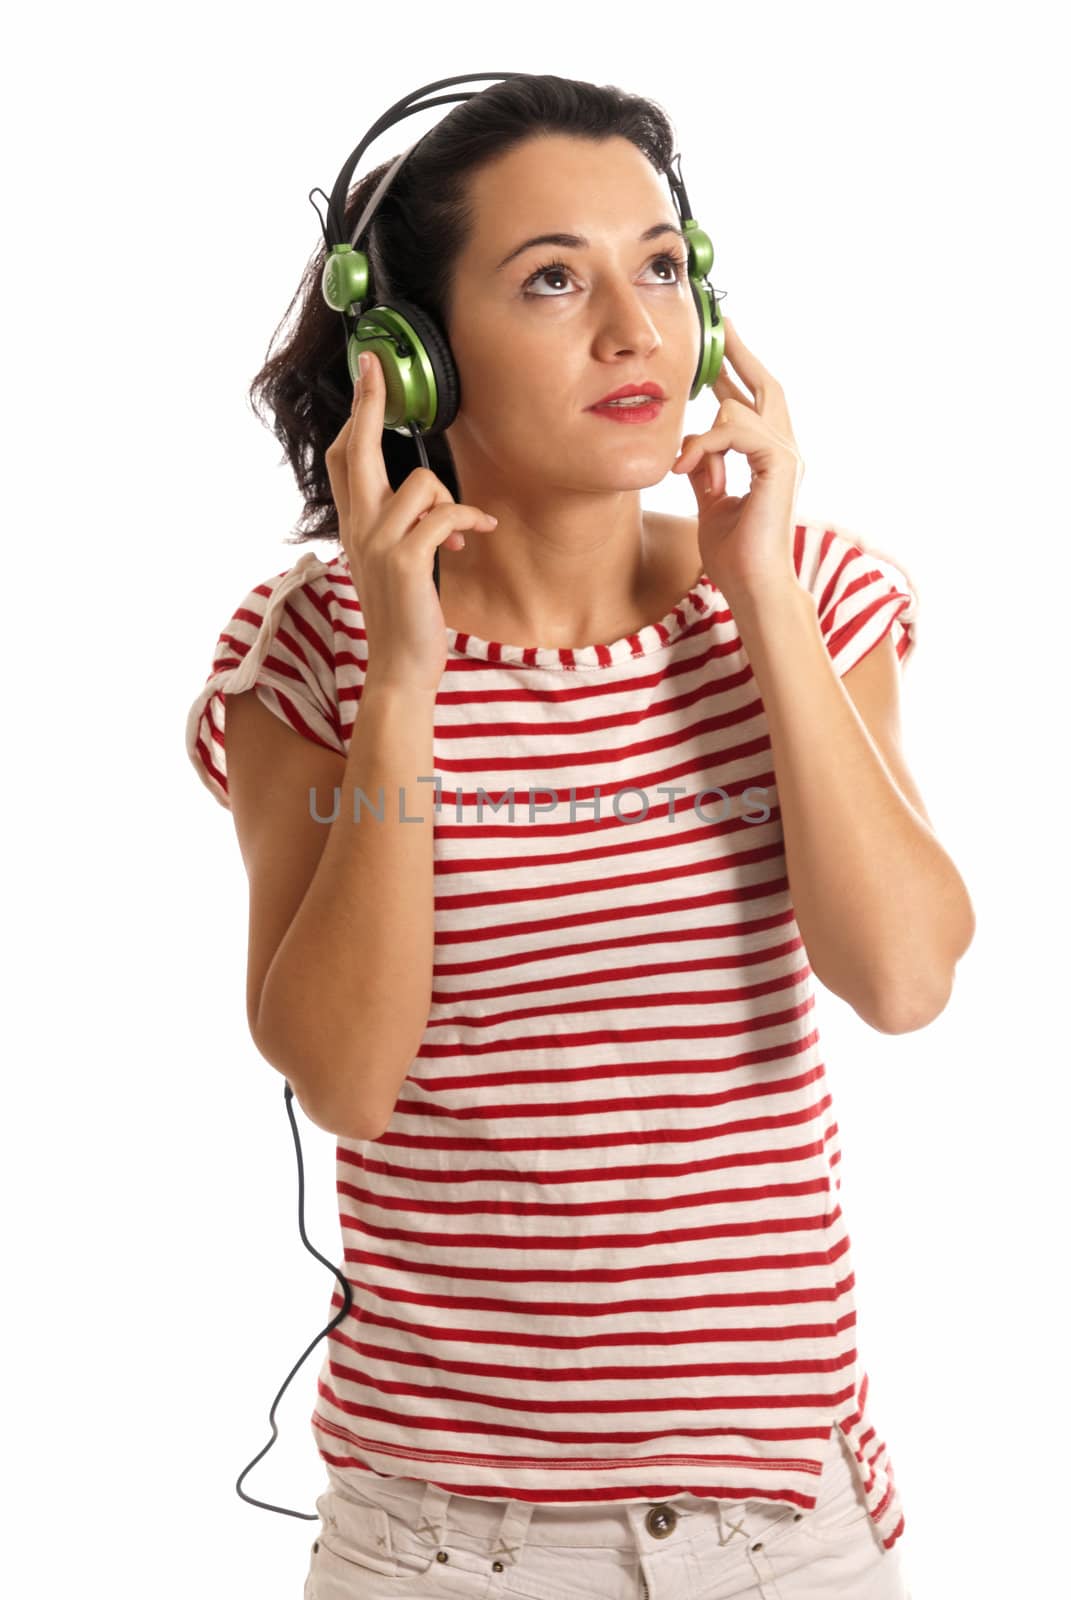 Young woman listening music with headphones standing on white background